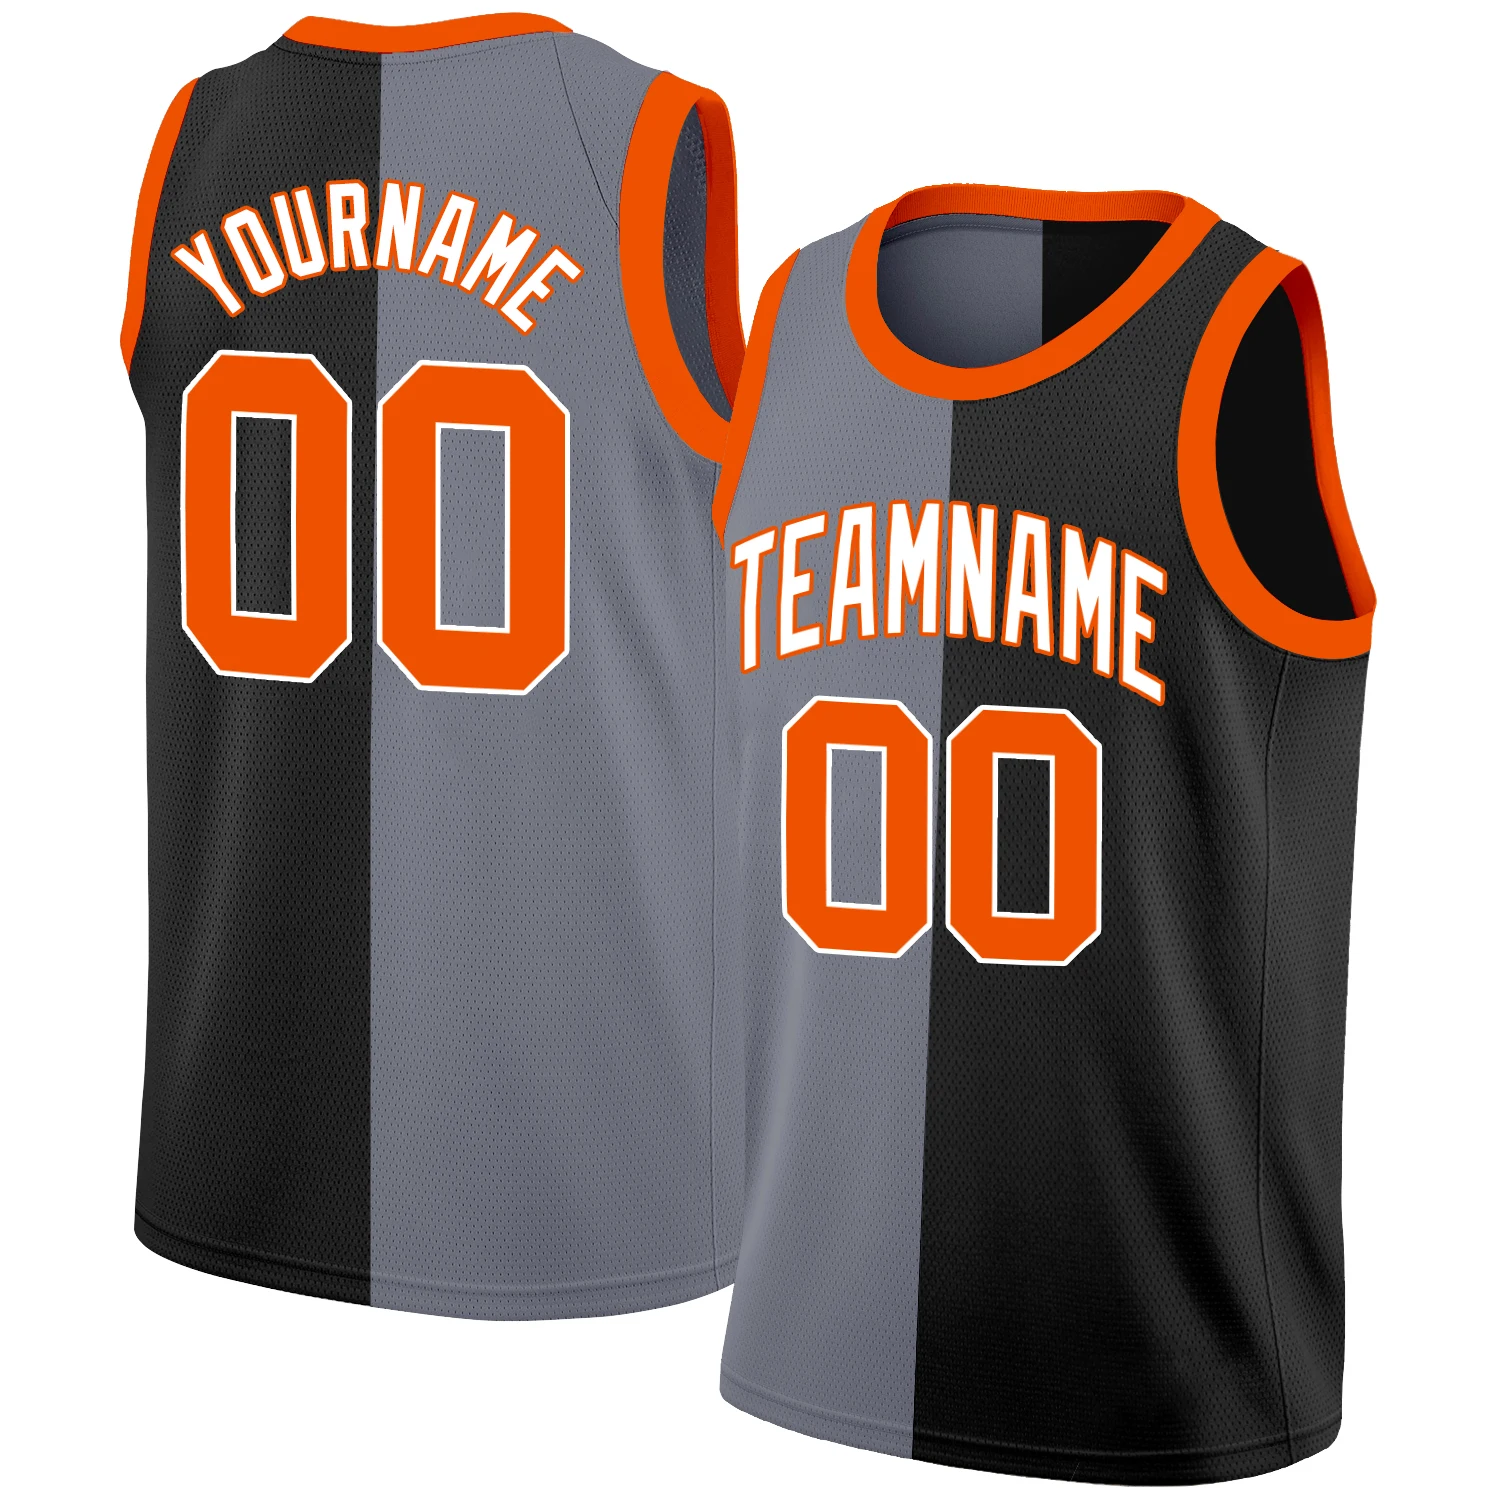 

Custom Round Neck Basketball Jersey Full Sublimation Team Name/Number Breathable Training Athletic Shirts for Male/Lady/Kids